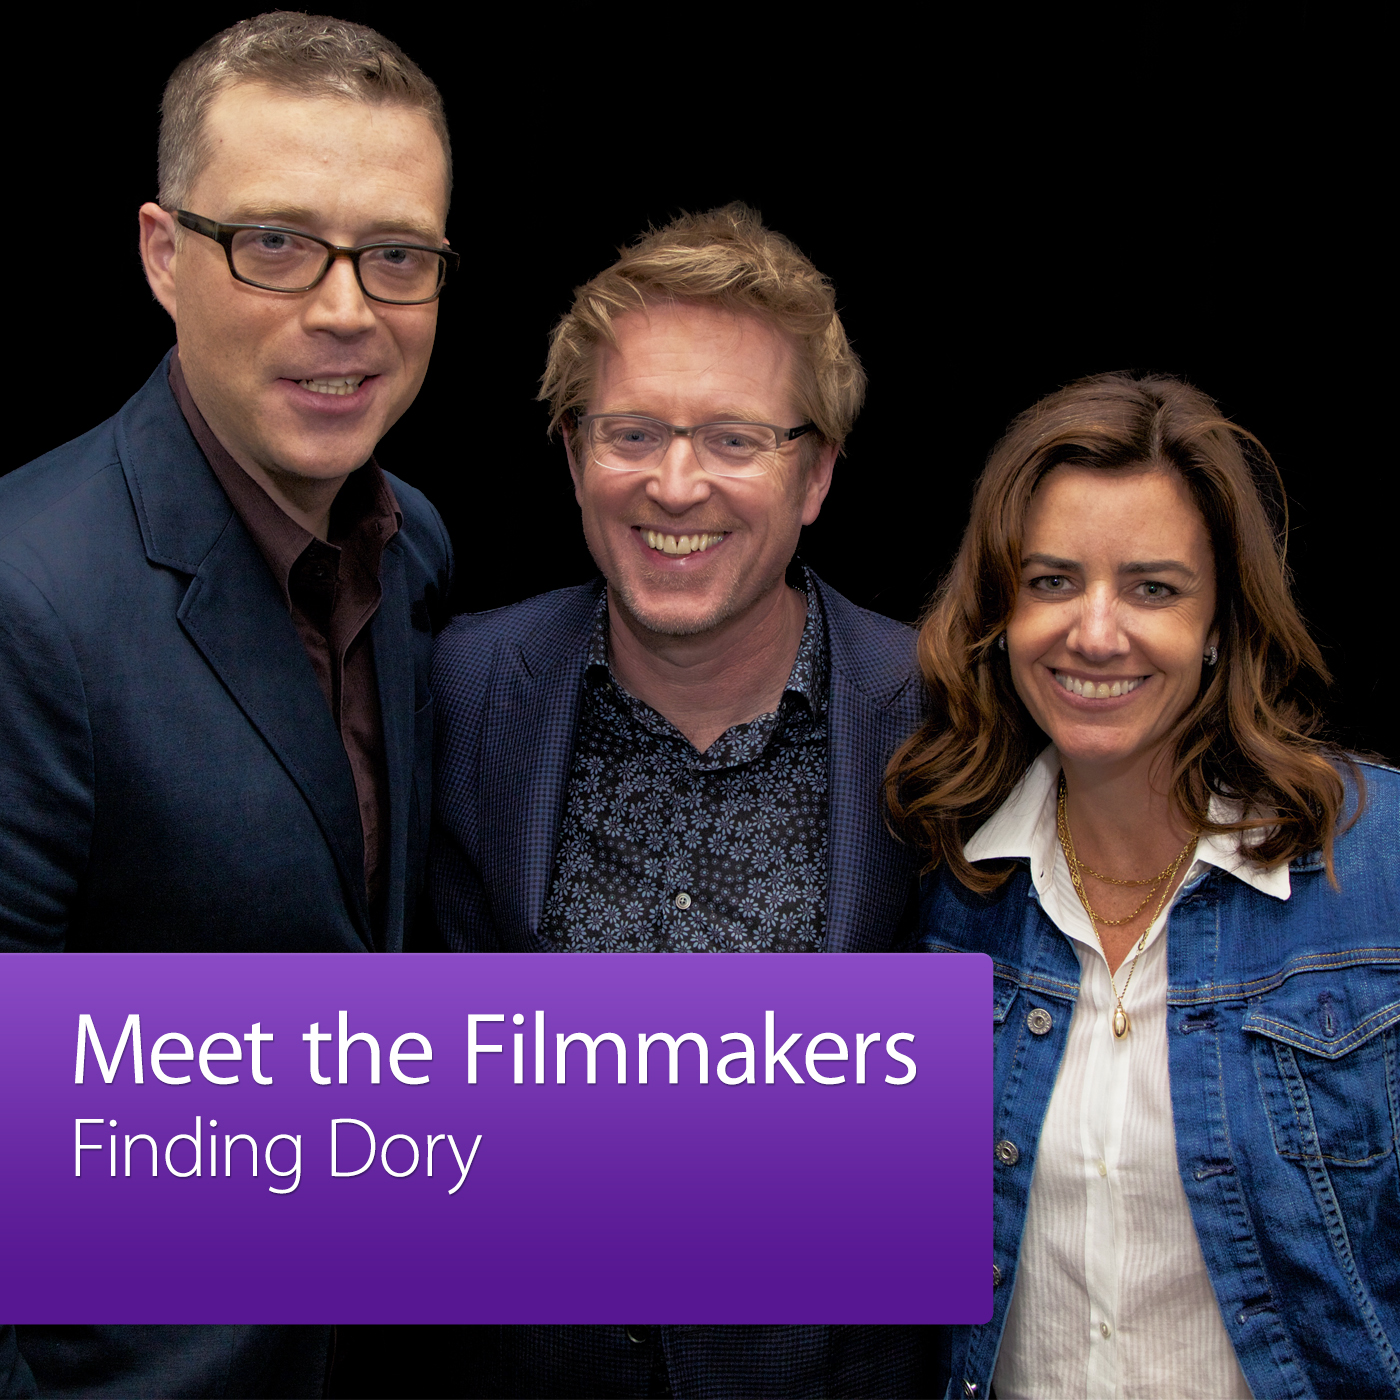 Finding Dory: Meet the Filmmakers